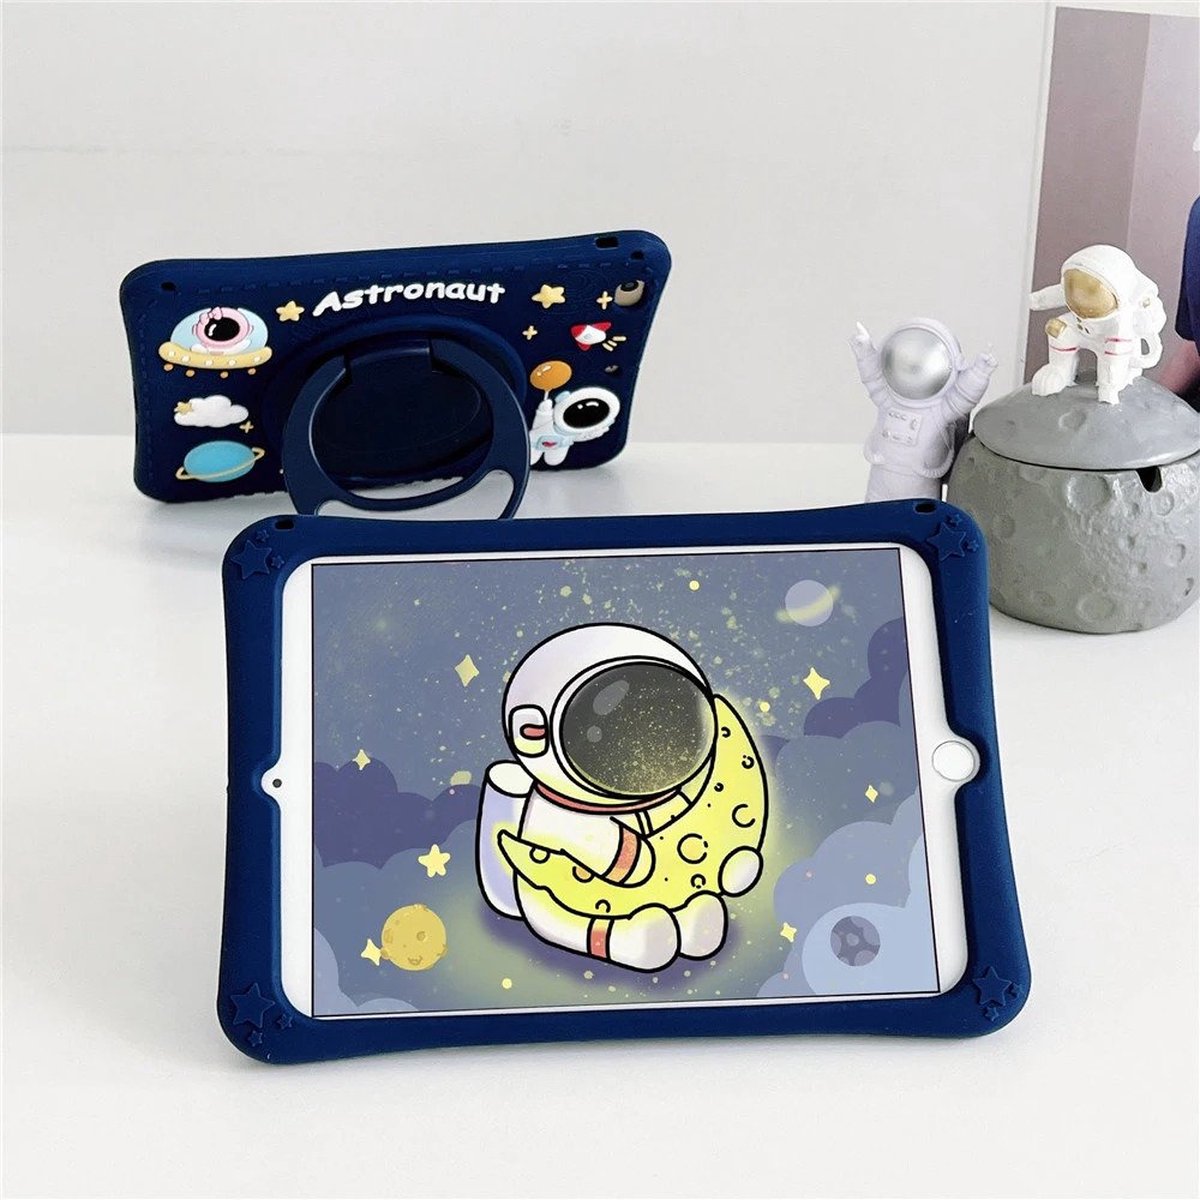 Siliconen Ipad hoes kids, 10.9 inch – Astronaut. iPad Air, iPad cover, beschermingshoes